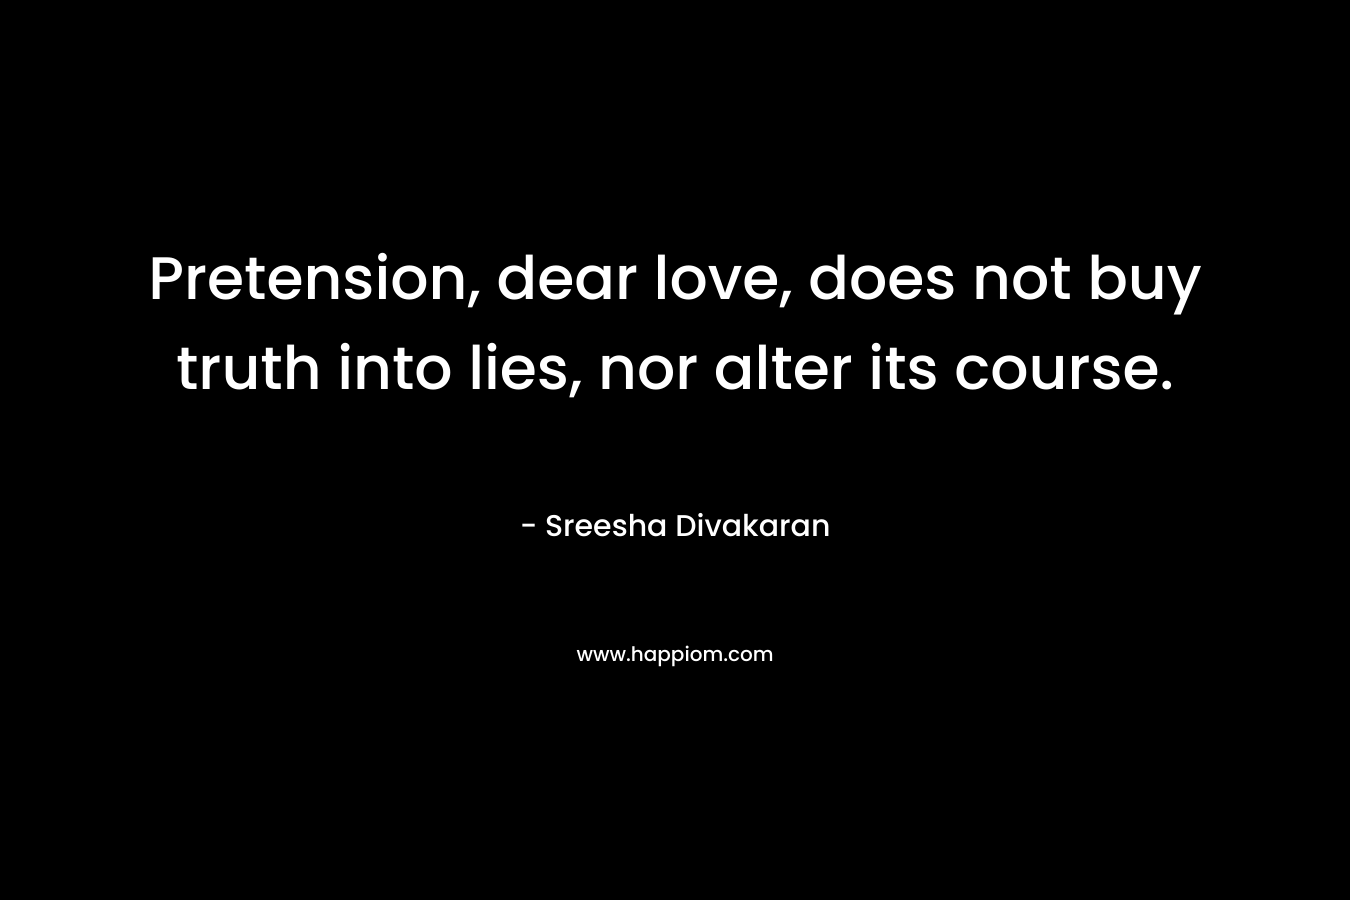 Pretension, dear love, does not buy truth into lies, nor alter its course. – Sreesha Divakaran